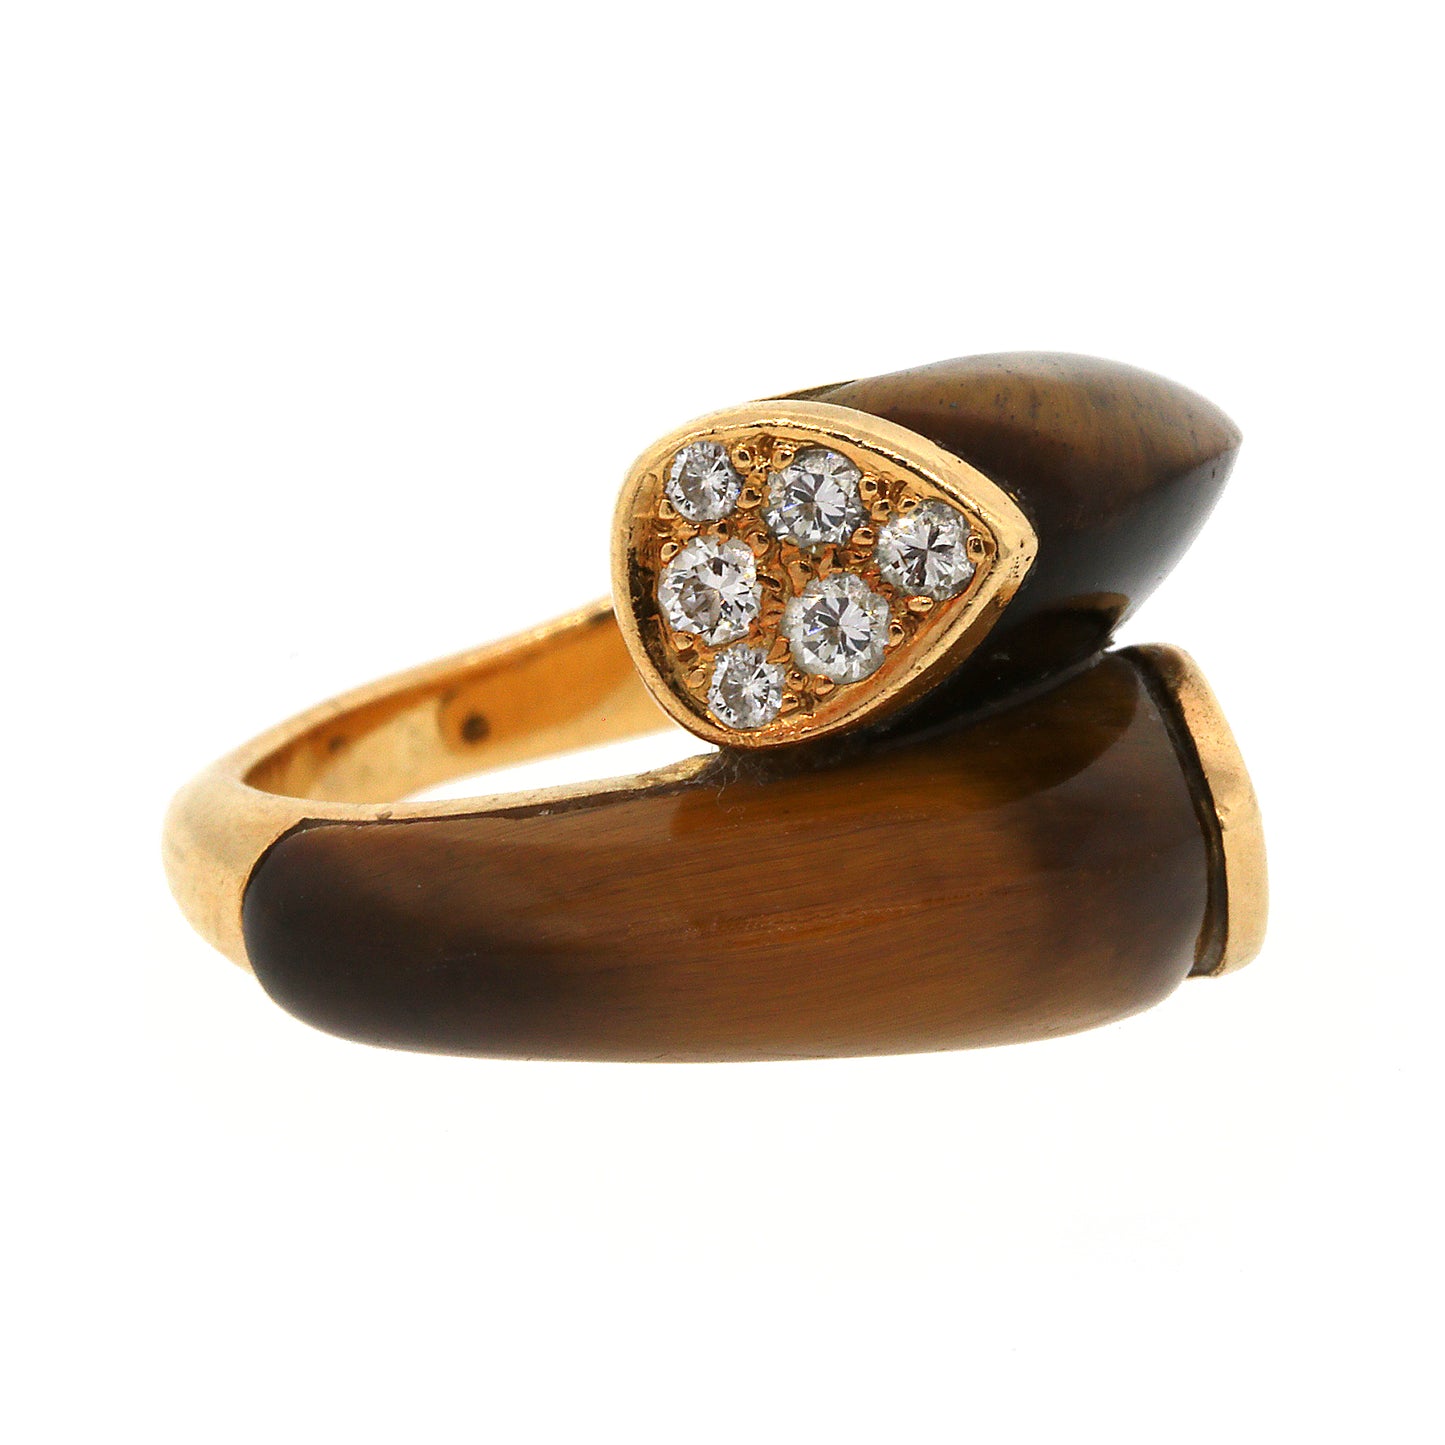 Van Cleef and Arpels Tiger's Eye Diamond Bypass Ring